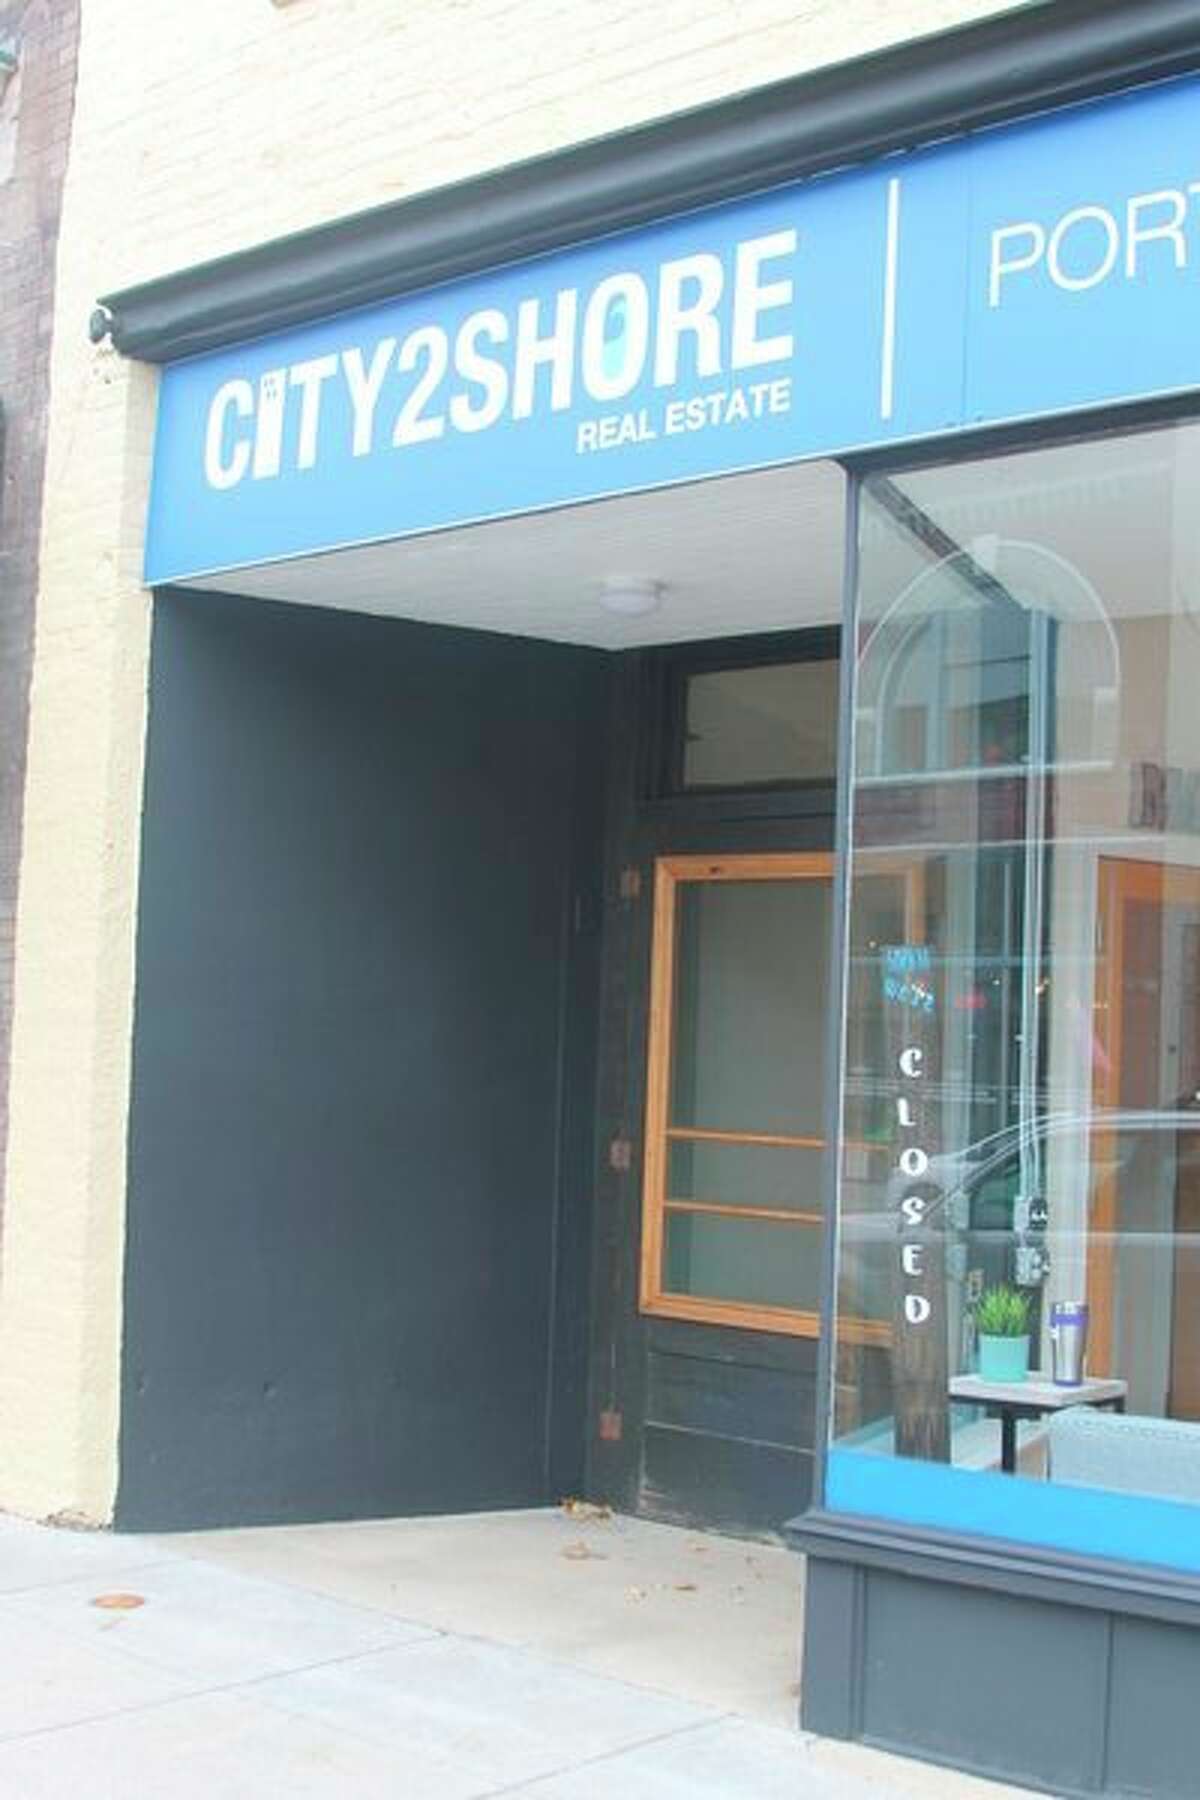 Hudsonville-based brokerage, City2Shore has opened a new location in downtown Manistee, serving both commercial and residential real estate clients. (Michelle Graves/News Advocate)